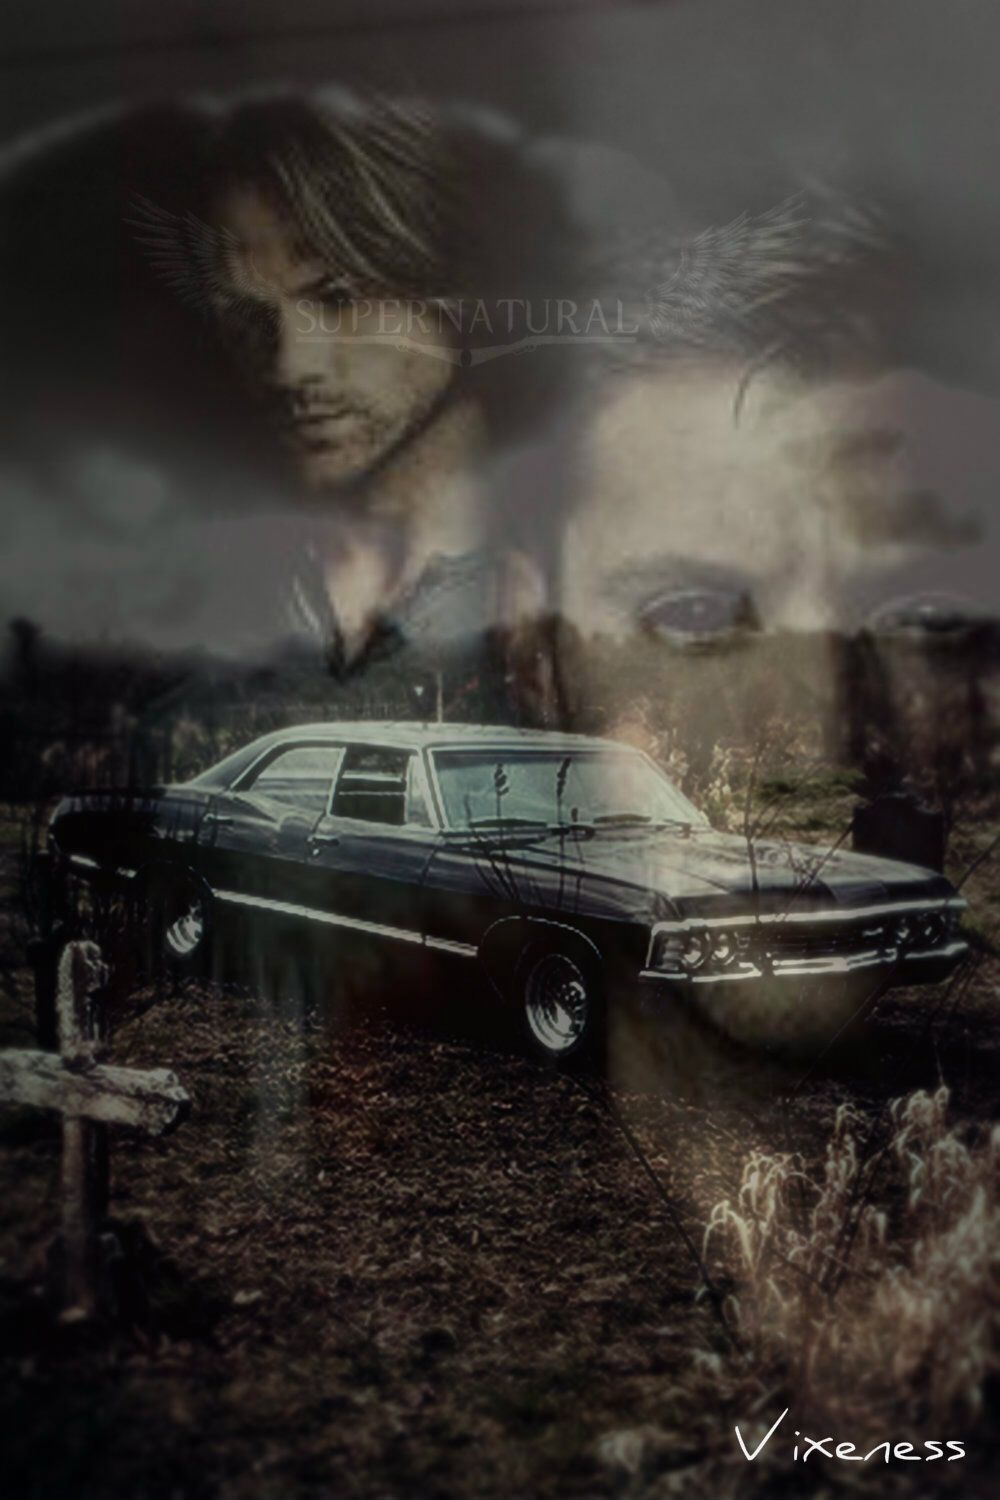 Supernatural 67 Chevy Impala Iphone Wallpaper By Vixen1337 - Chevrolet Impala  1967 Supernatural - 1000x1500 Wallpaper 